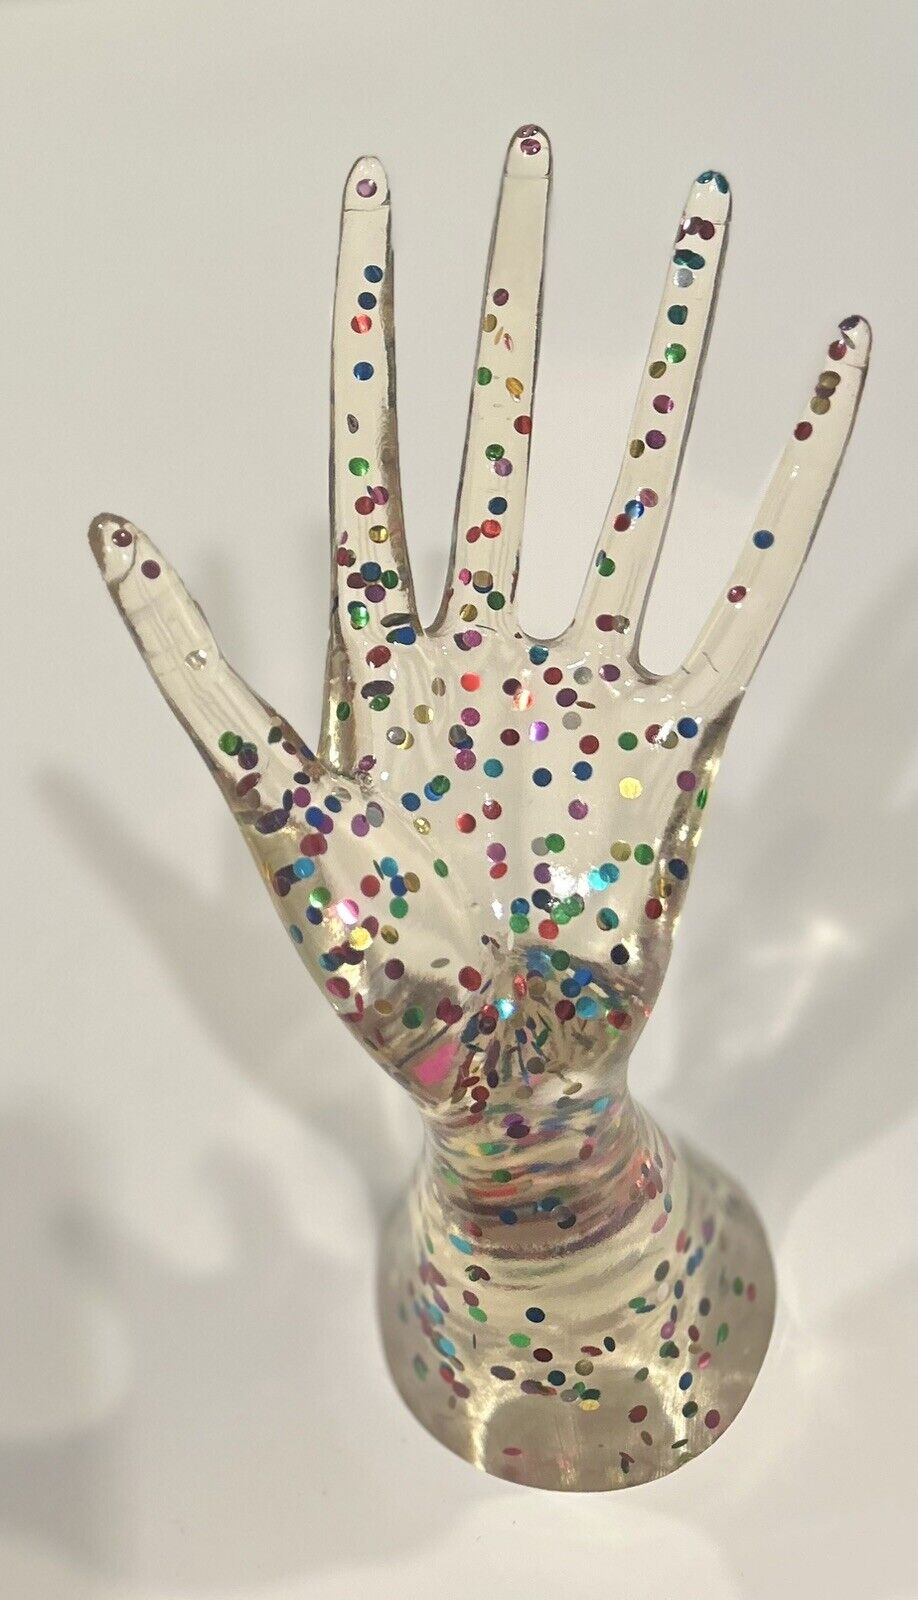 Vintage 1960s Acrylic Lucite Mannequin Jewelry Display Hand Form with Confetti